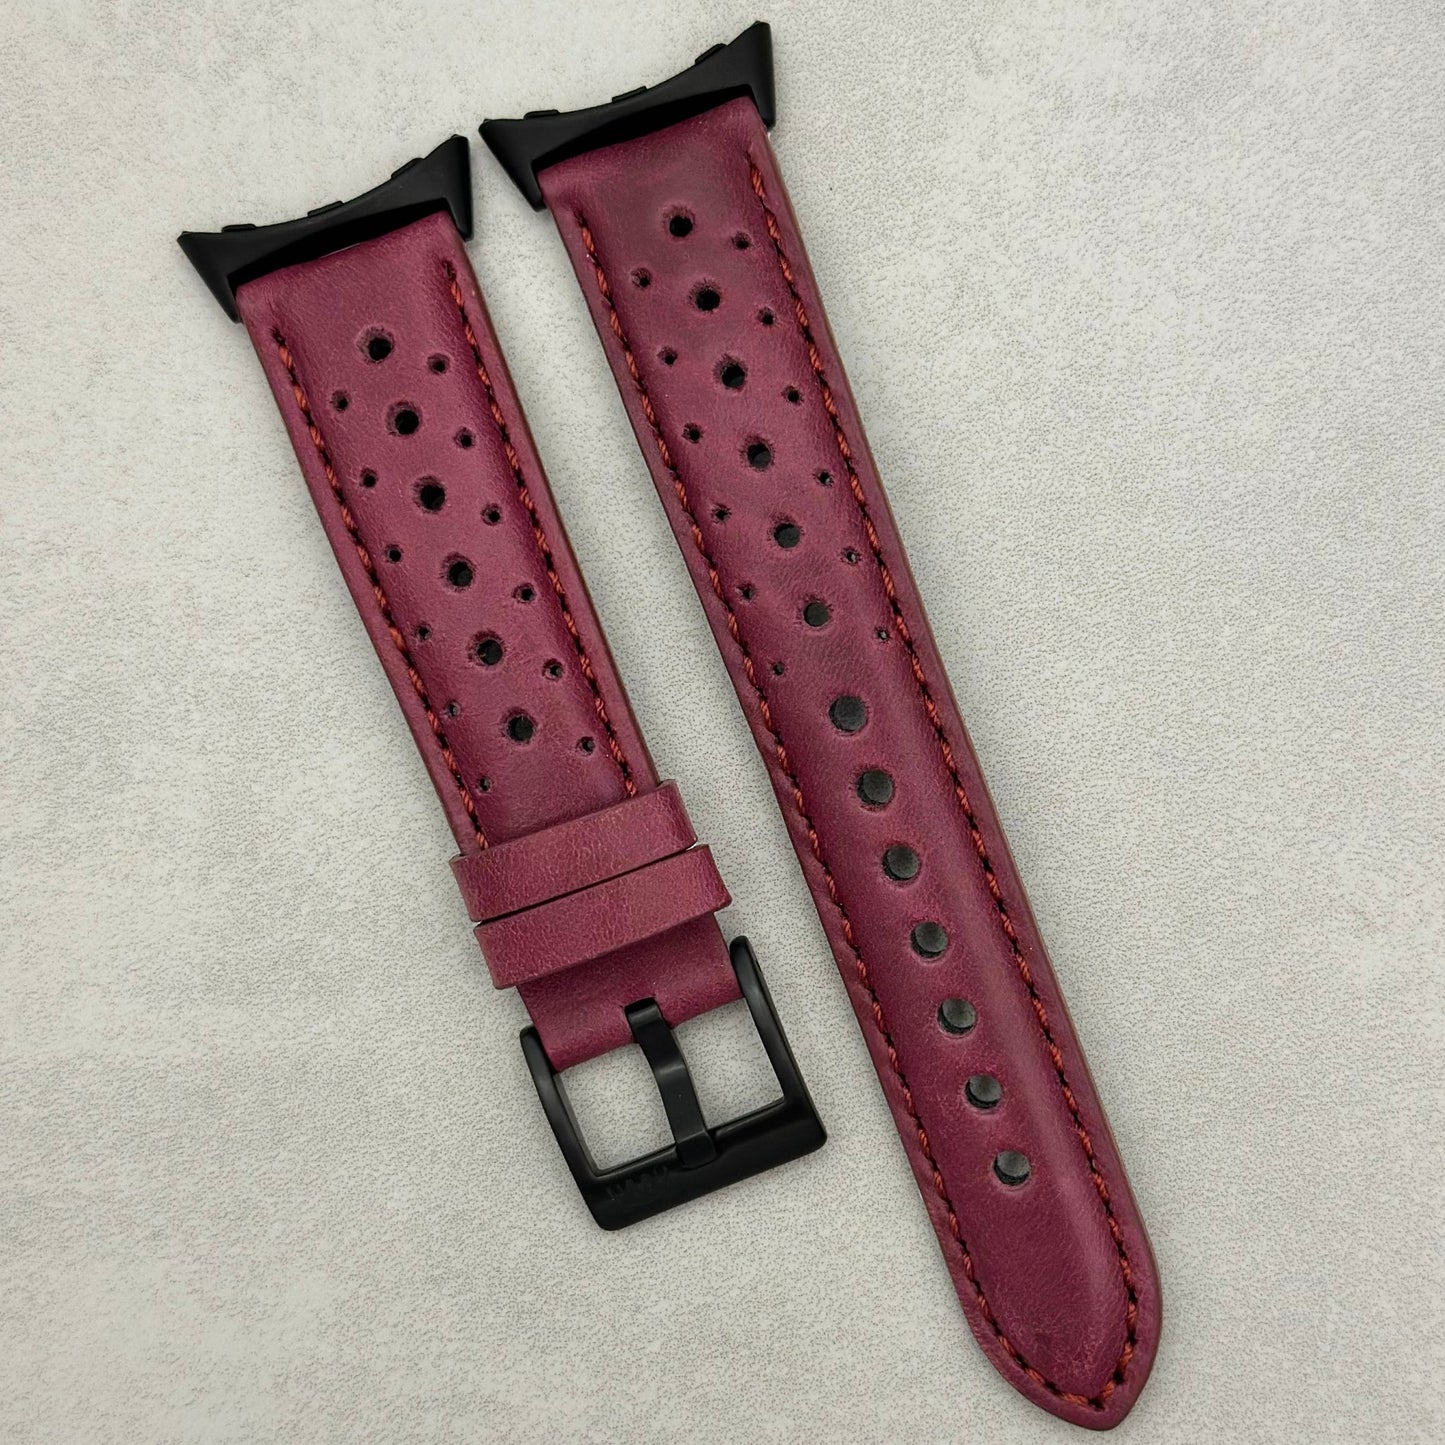 The Monte Carlo: Plum Purple Perforated Leather Google Pixel Watch Strap